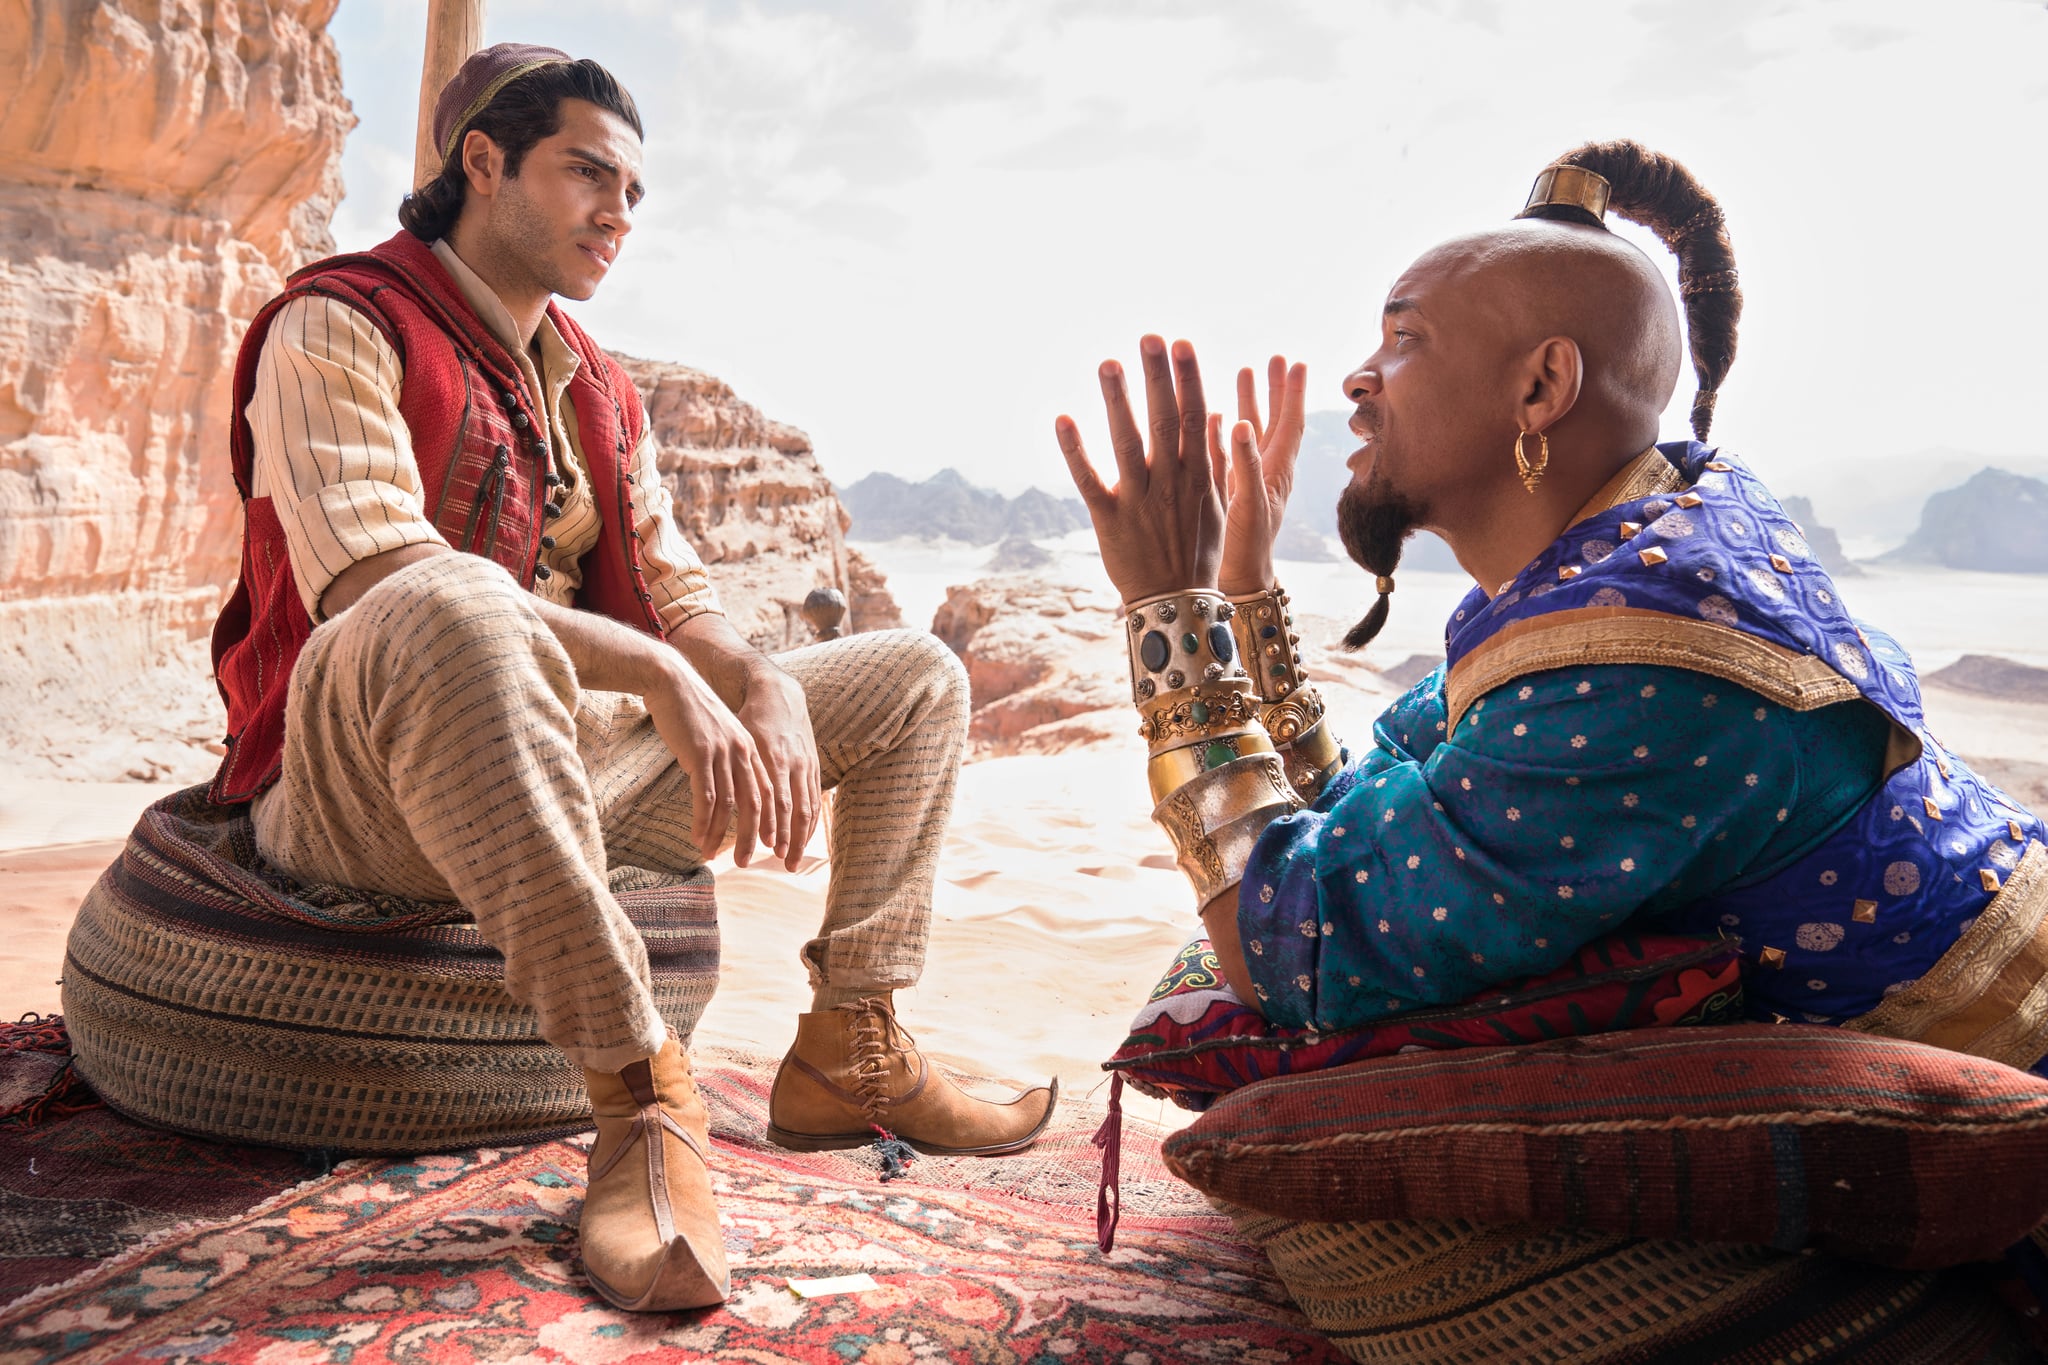 Mena Massoud as the street rat with a heart of gold, Aladdin, and Will Smith as the larger-than-life Genie in Disney's ALADDIN, directed by Guy Ritchie.